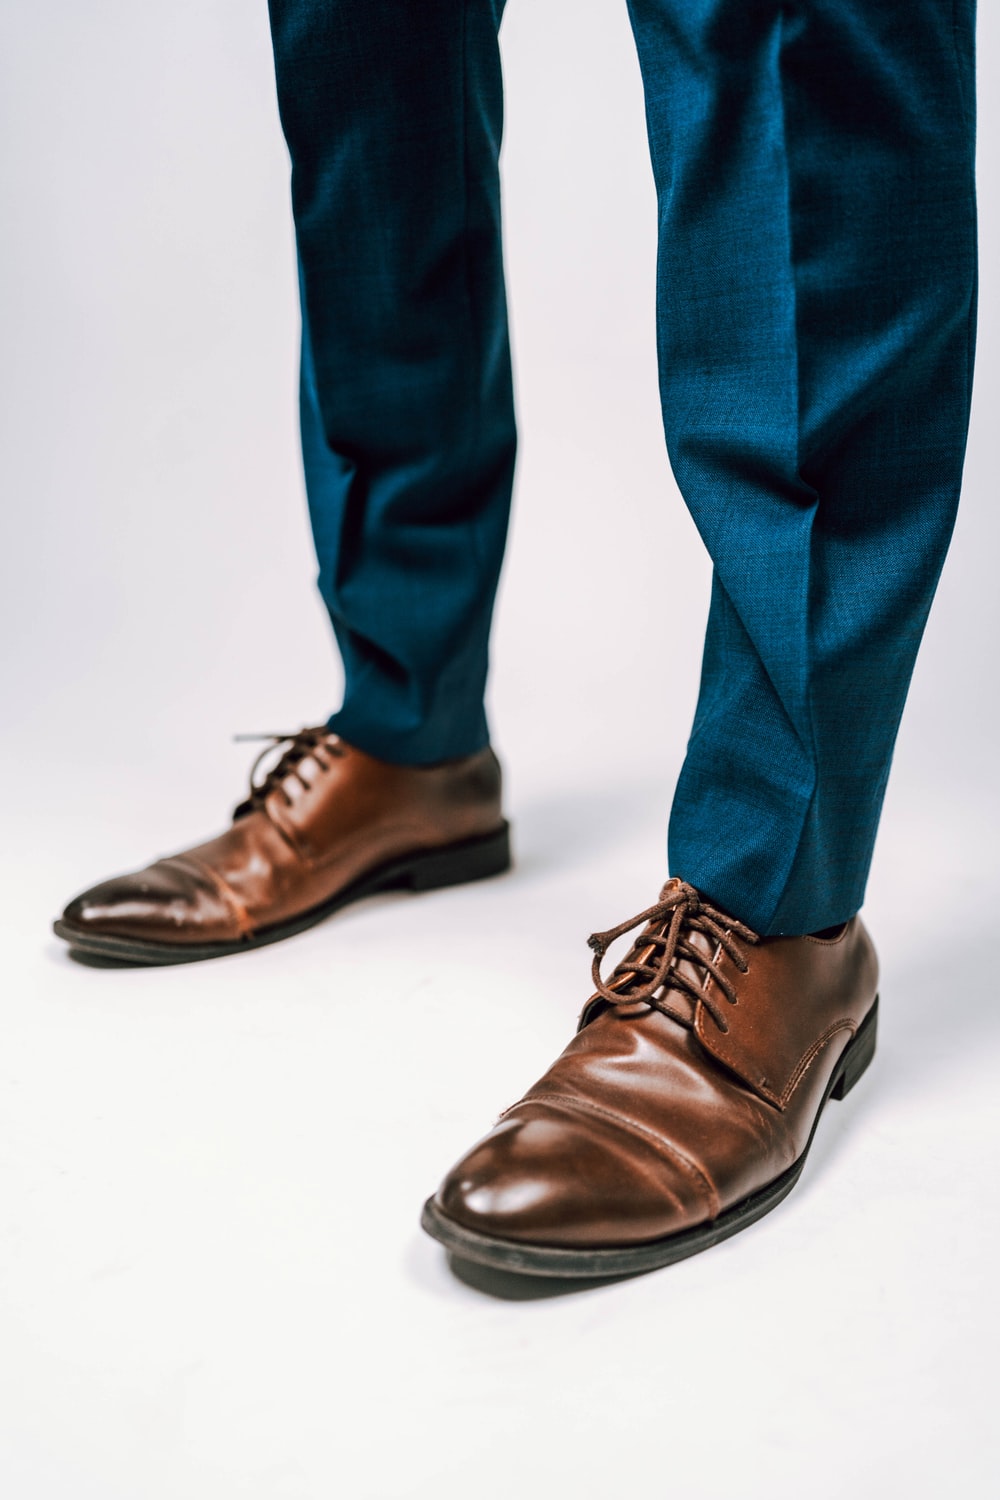 Dress Shoes Picture. Download Free Image